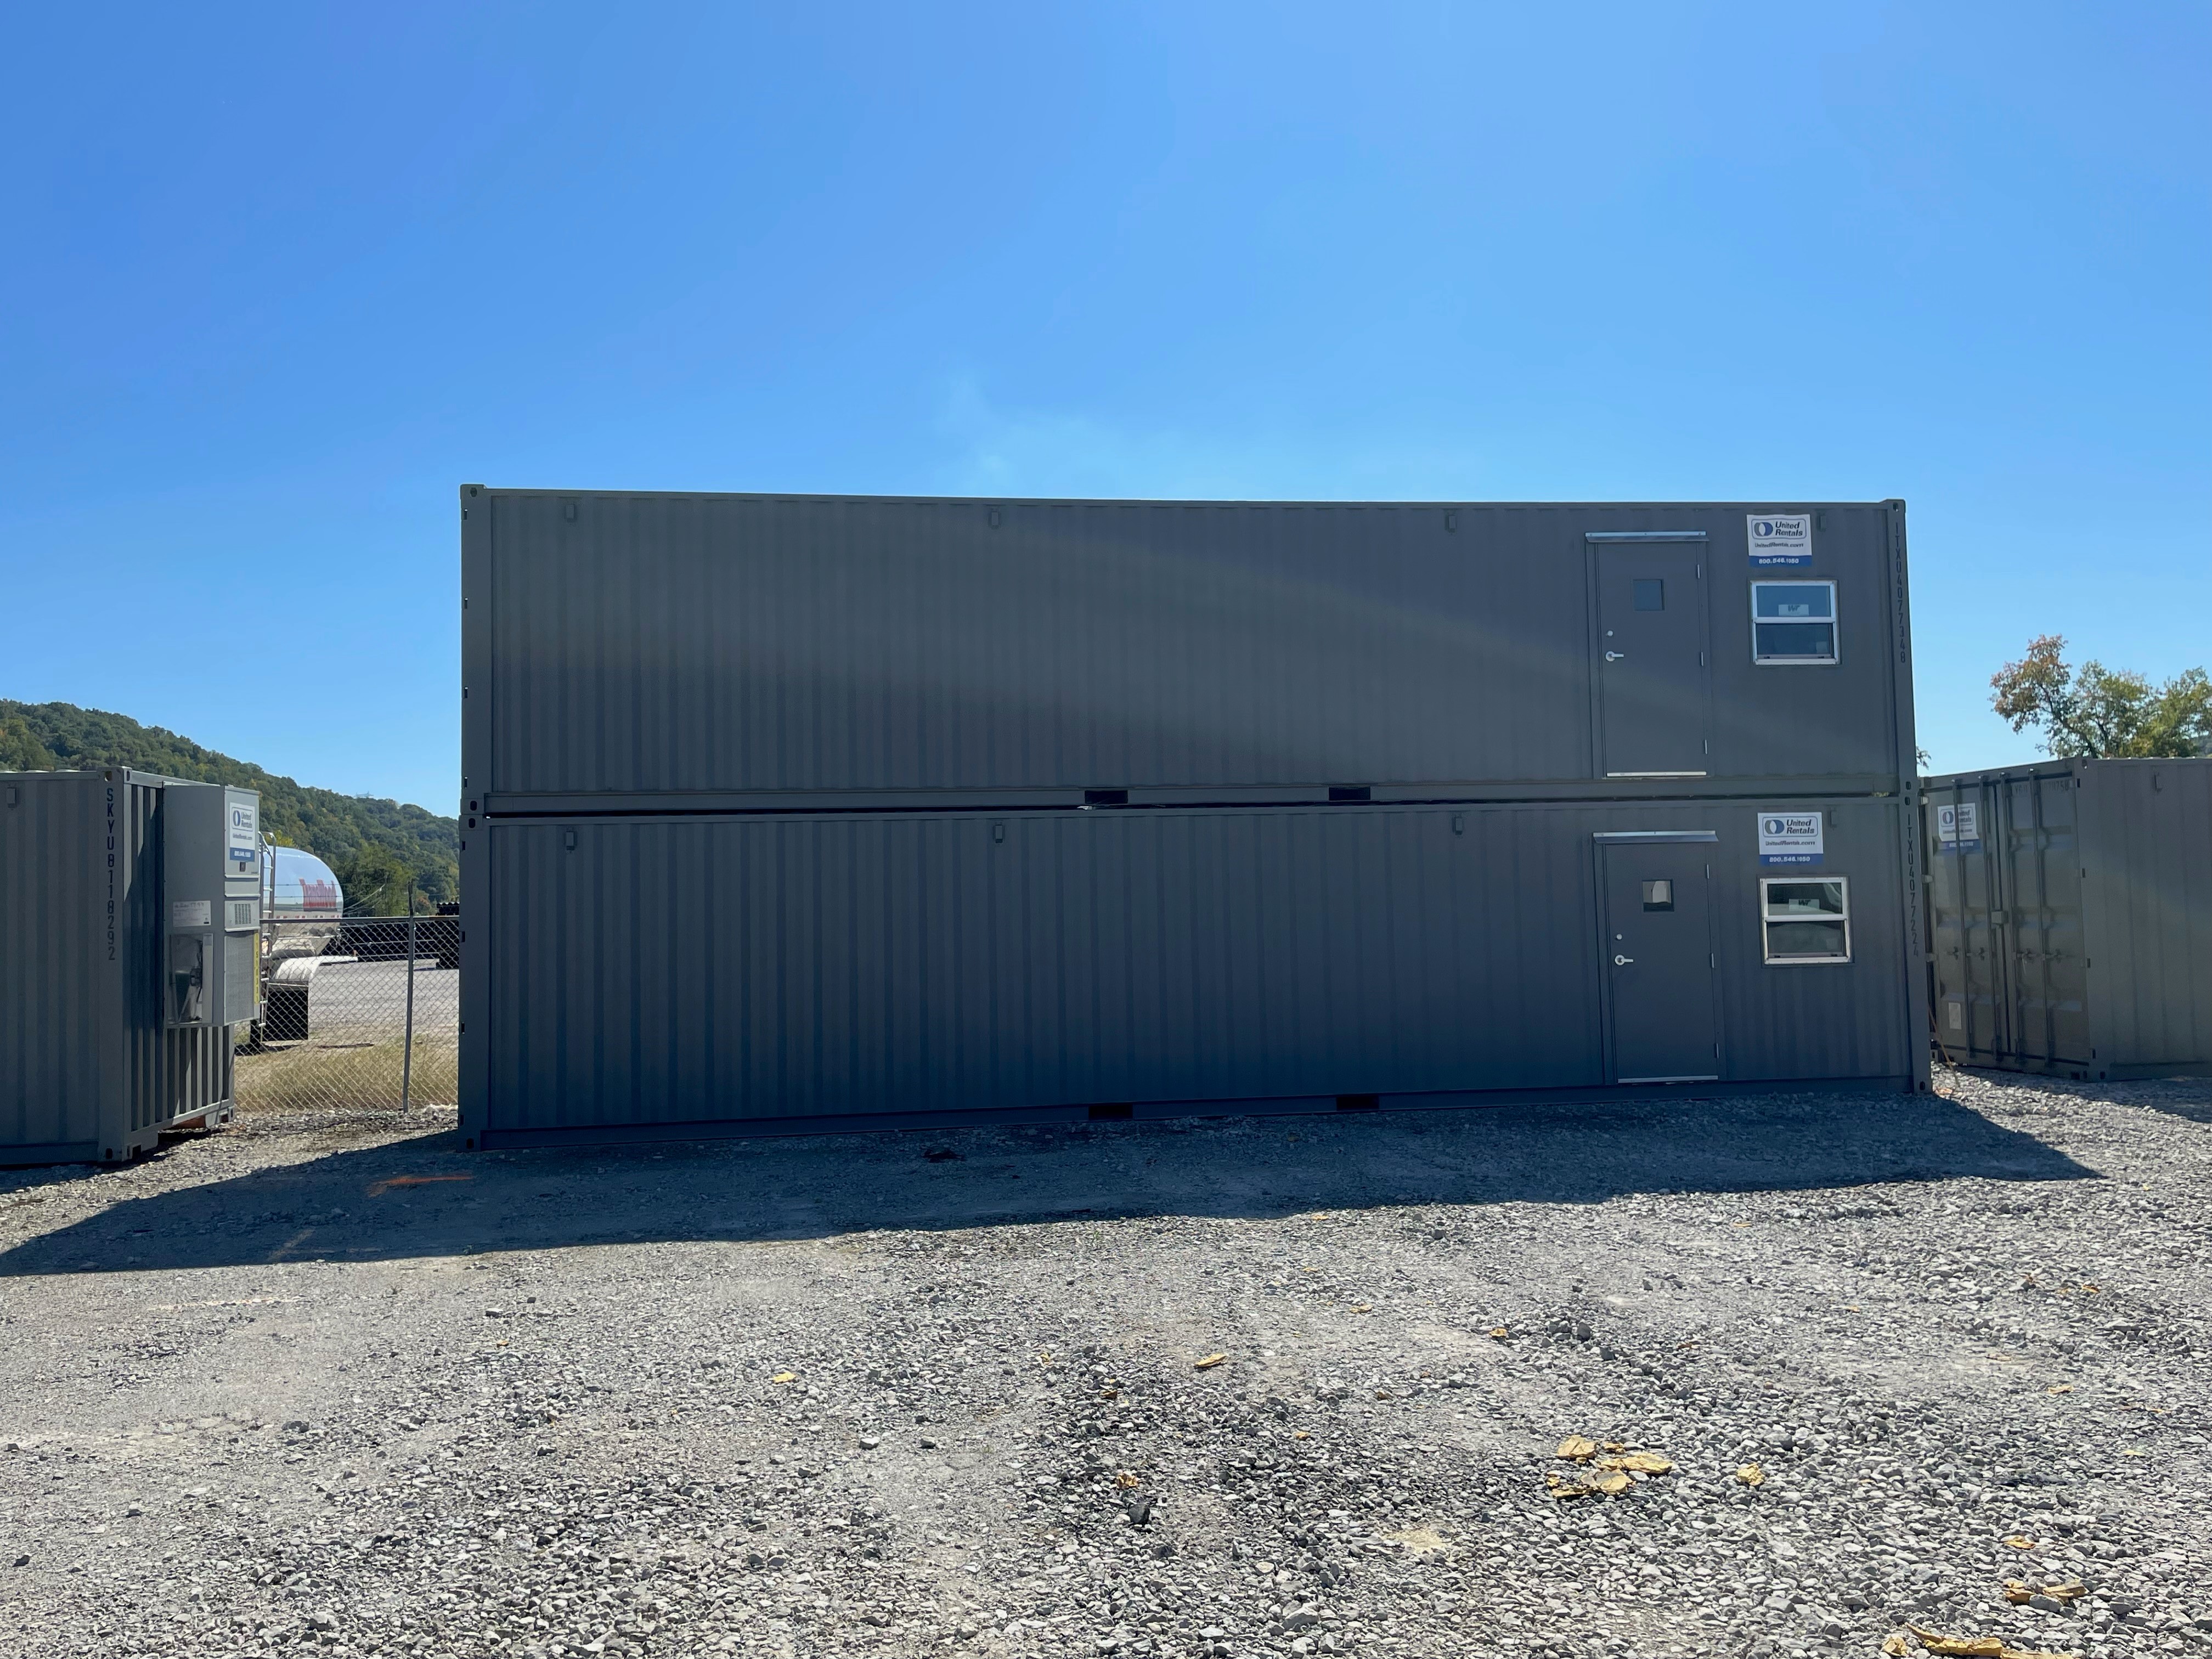 Image 2 | United Rentals - Storage Containers and Mobile Offices